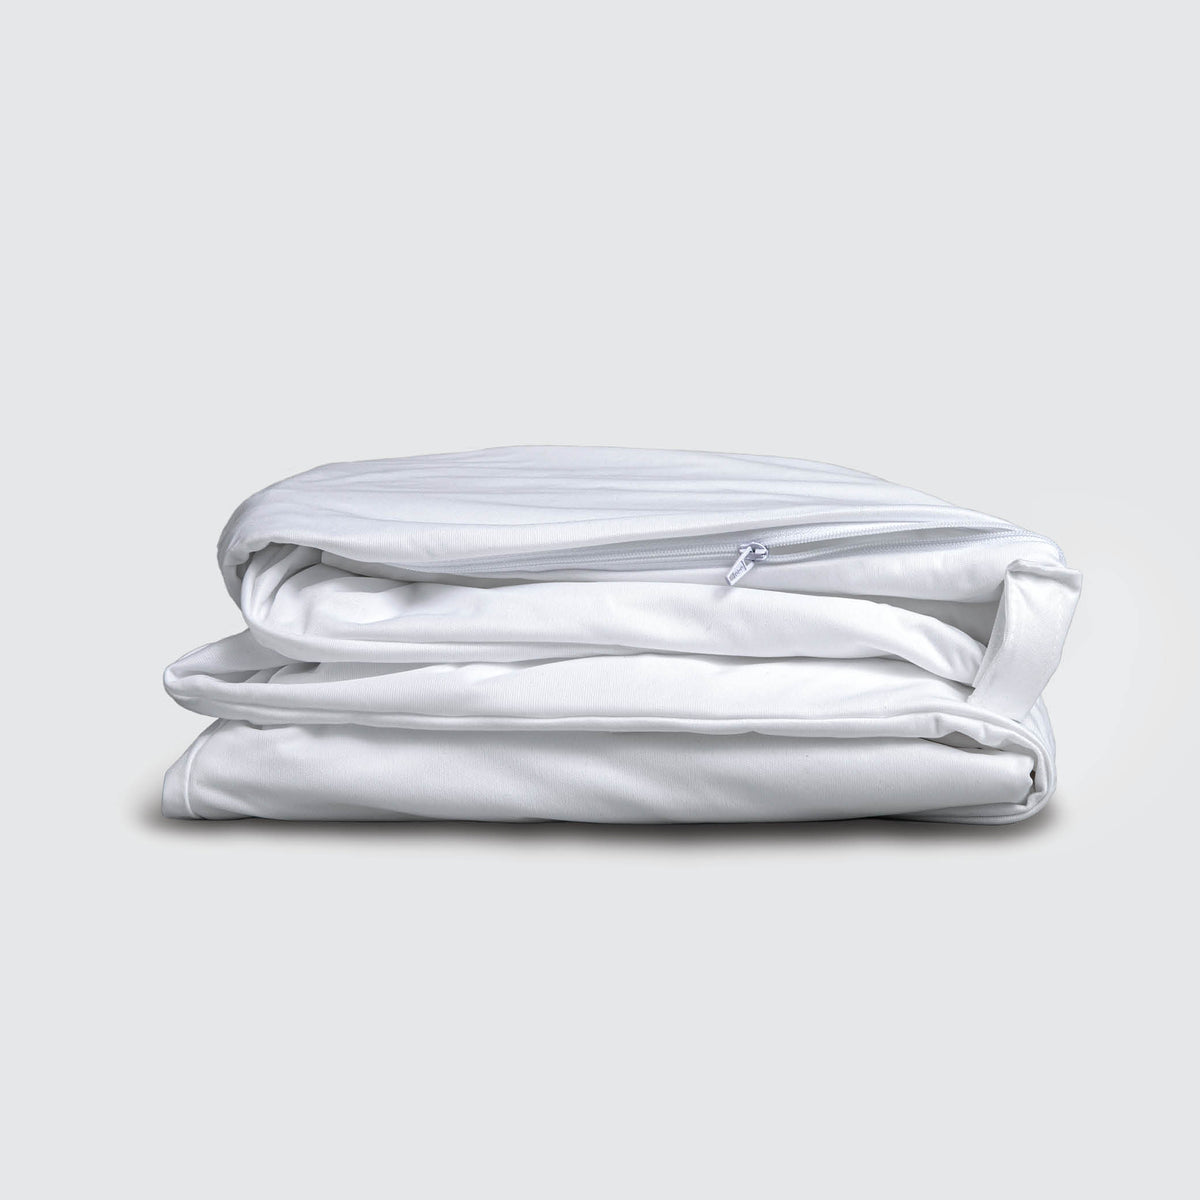 Image of a neatly folded Total Encasement Mattress Protector on a white background showcasing the zipper